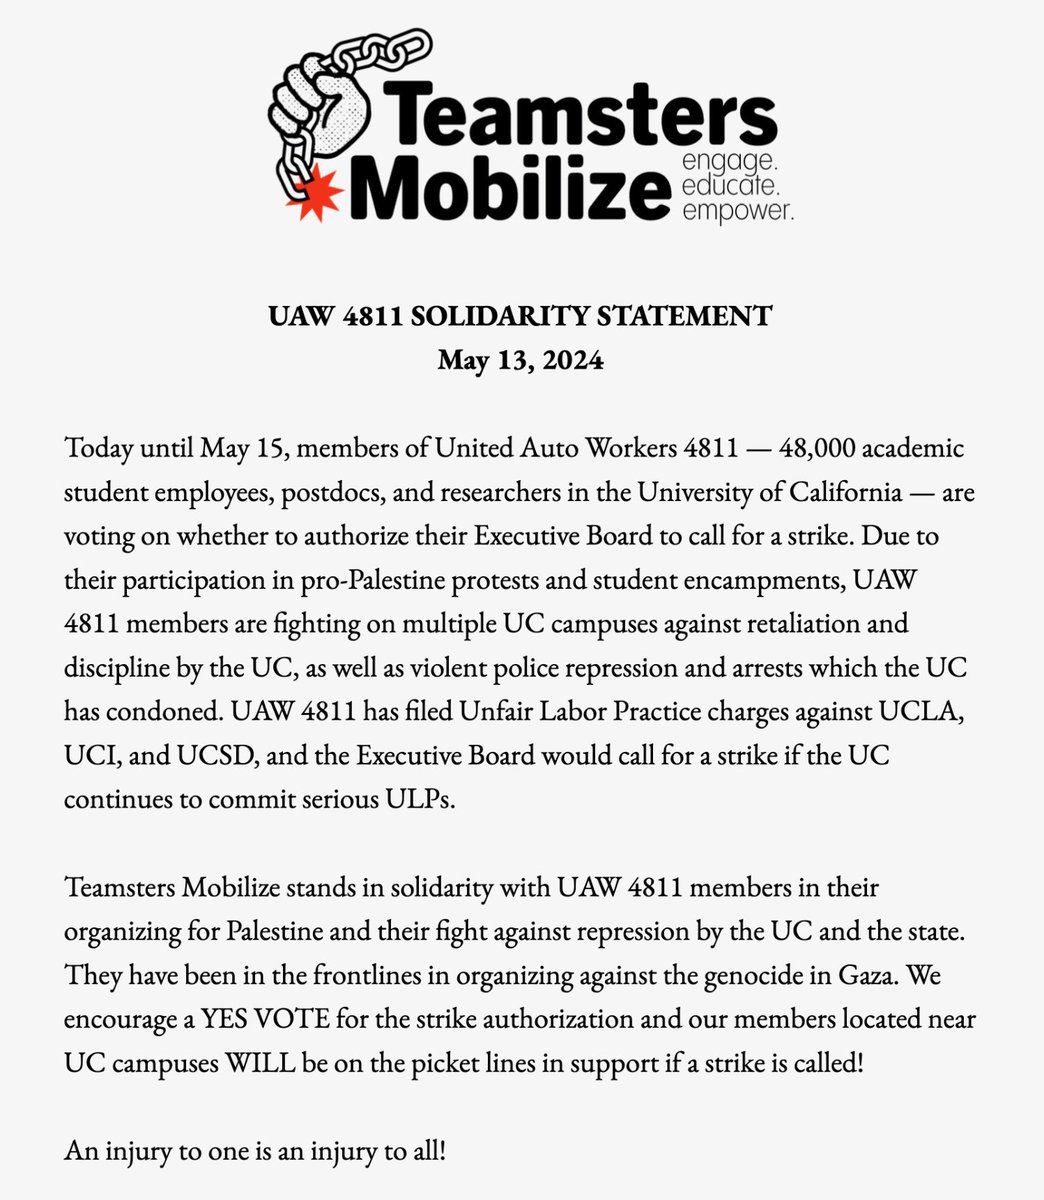 Teamsters Mobilize’s solidarity statement on @uaw_4811 strike authorization vote. 
We encourage every UAW 4811 comrade to VOTE YES! 
✊🏼✊🏽✊🏿🇵🇸